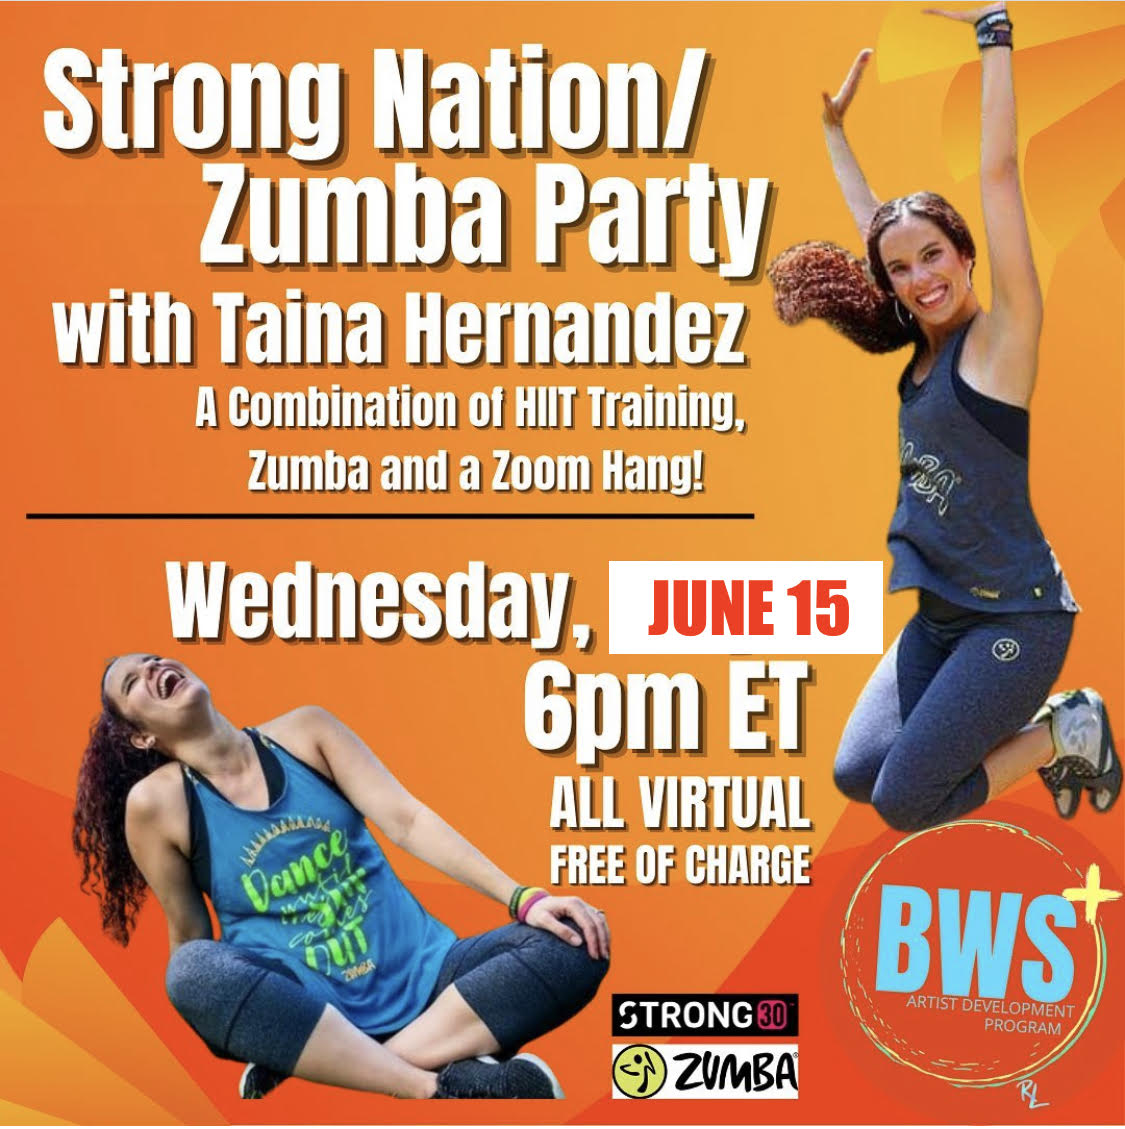 Strong Nation Zumba Party with Taina Hernandez